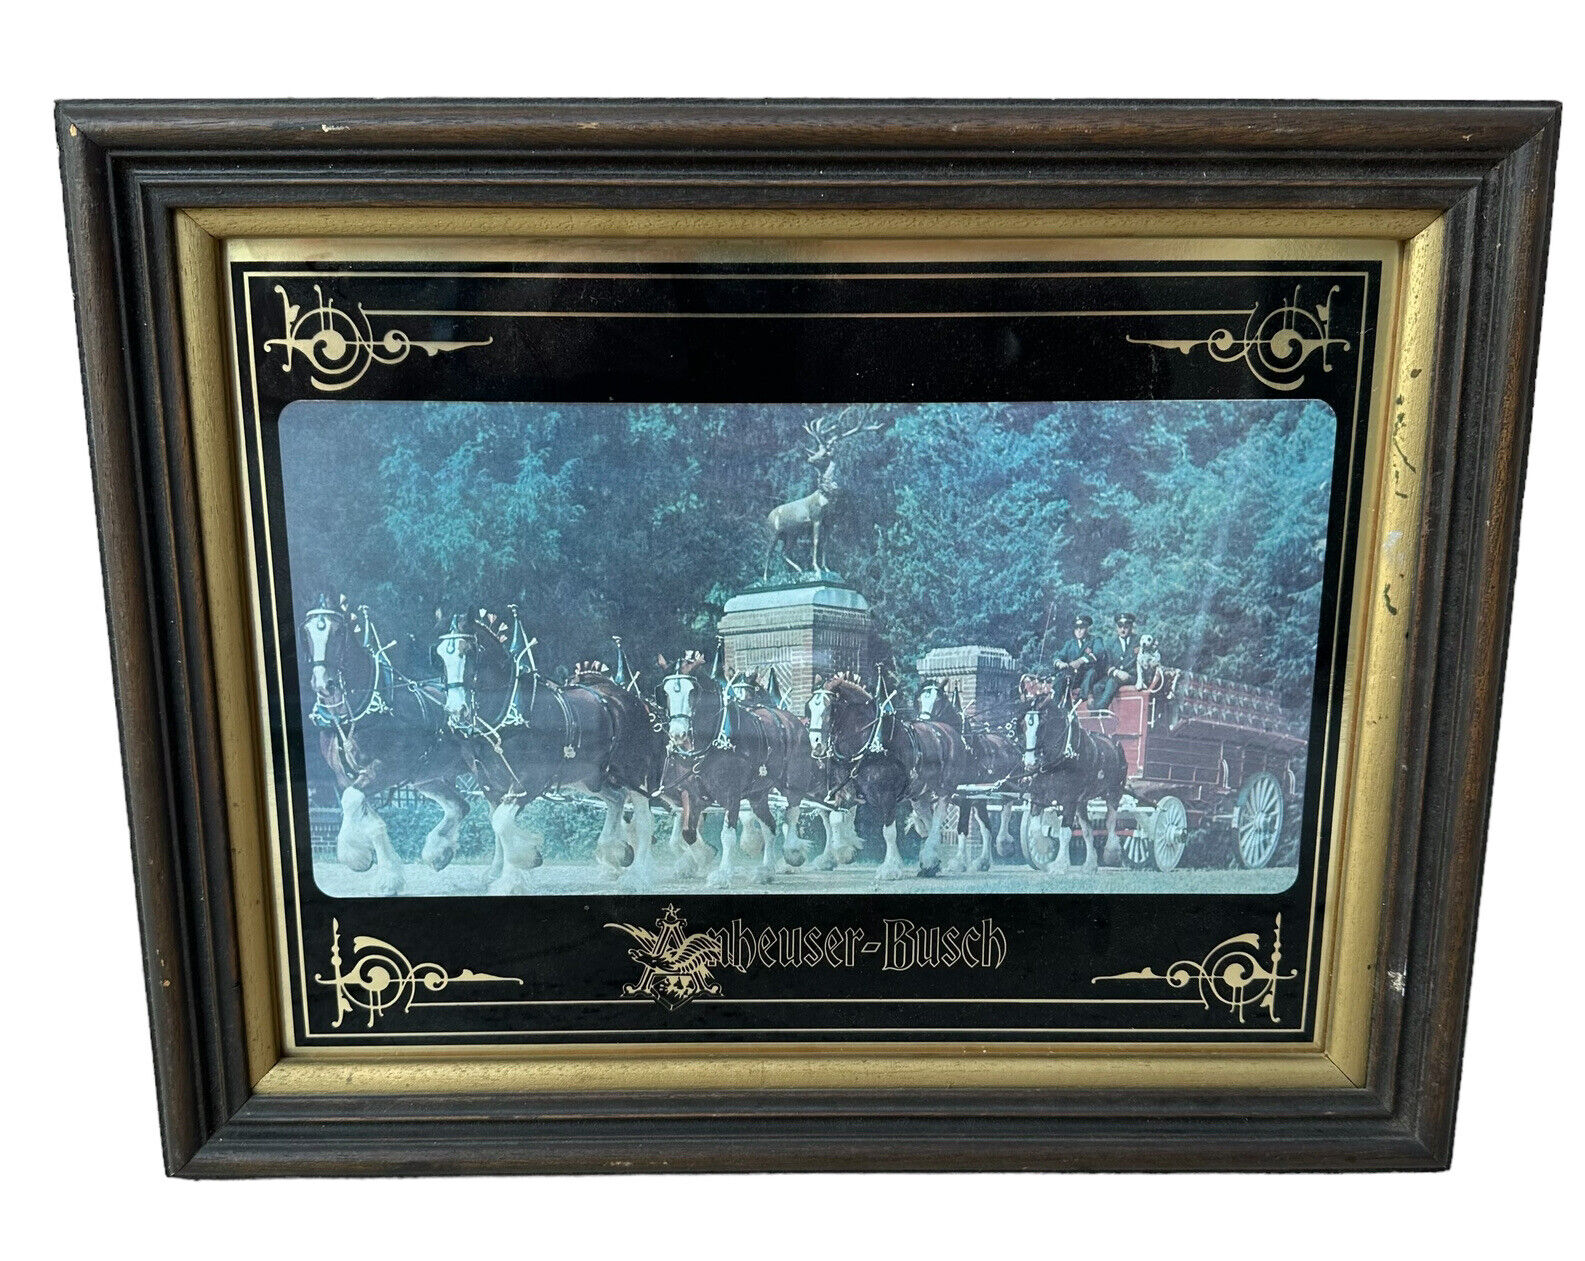 1978 Framed Clydesdale Anheuser Busch Picture by George Nathan